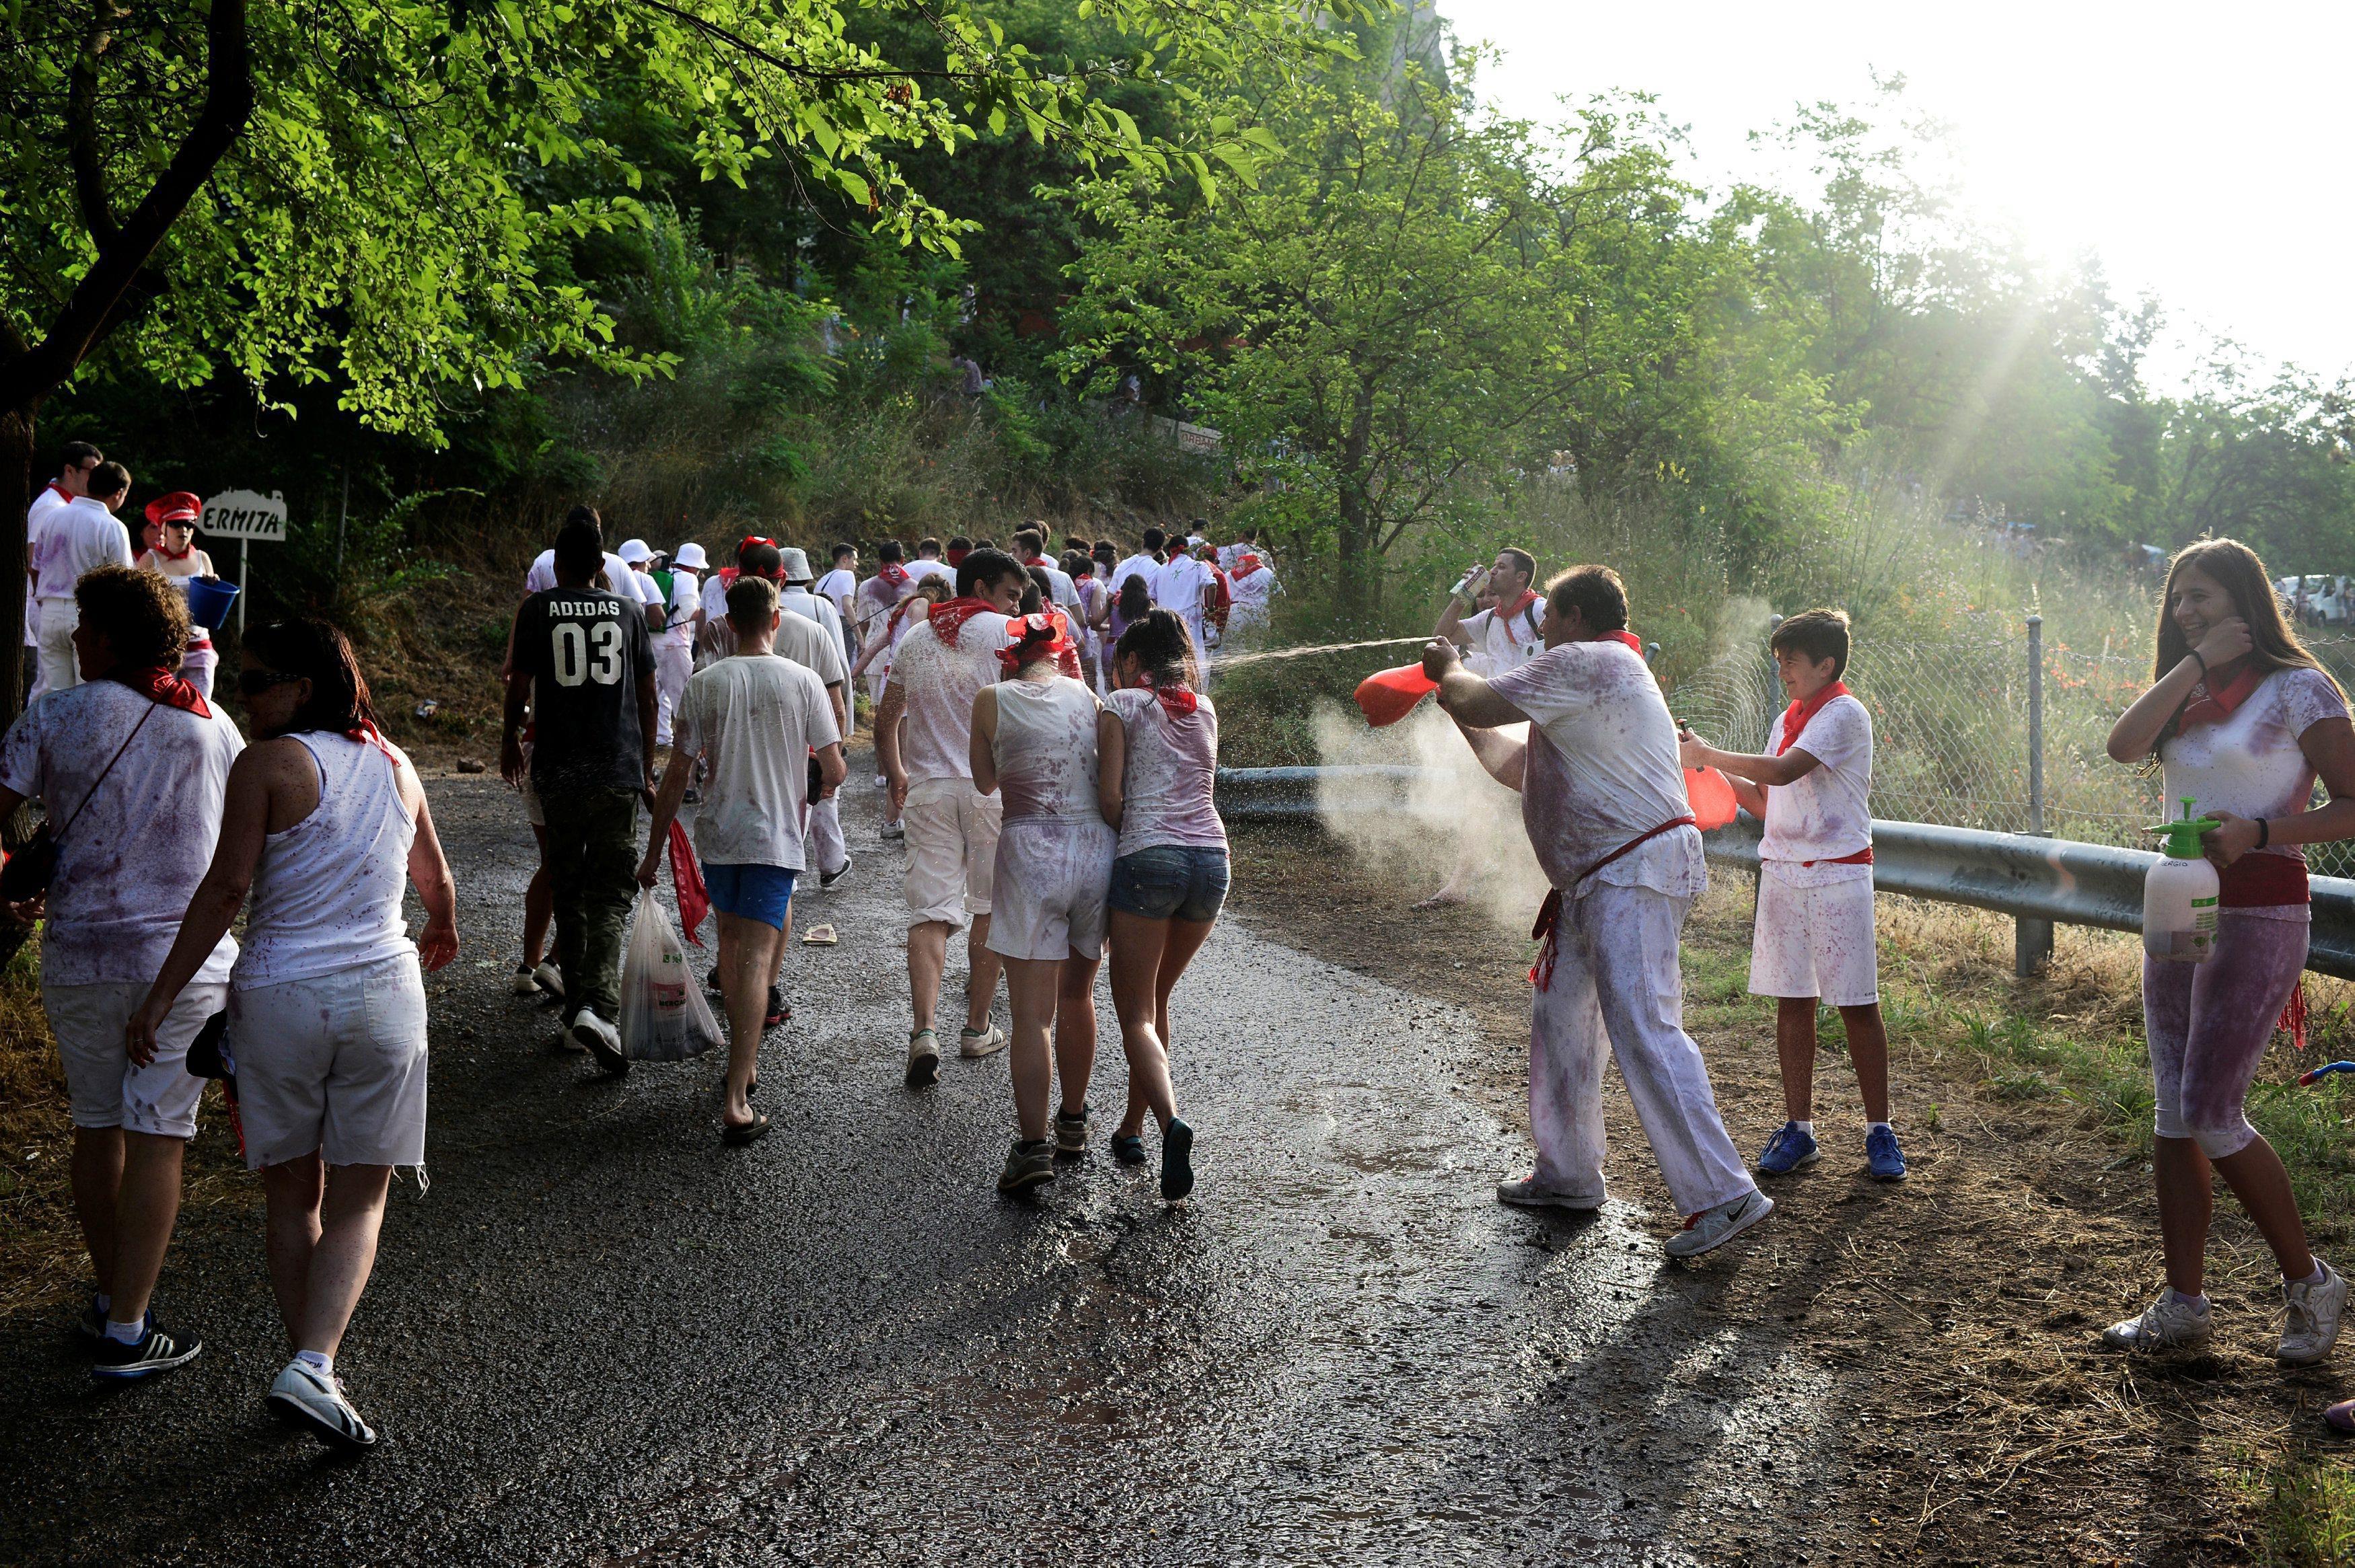 Revellers have wine sprayed at them during the Batalla de Vino (Wine Battle) in Haro